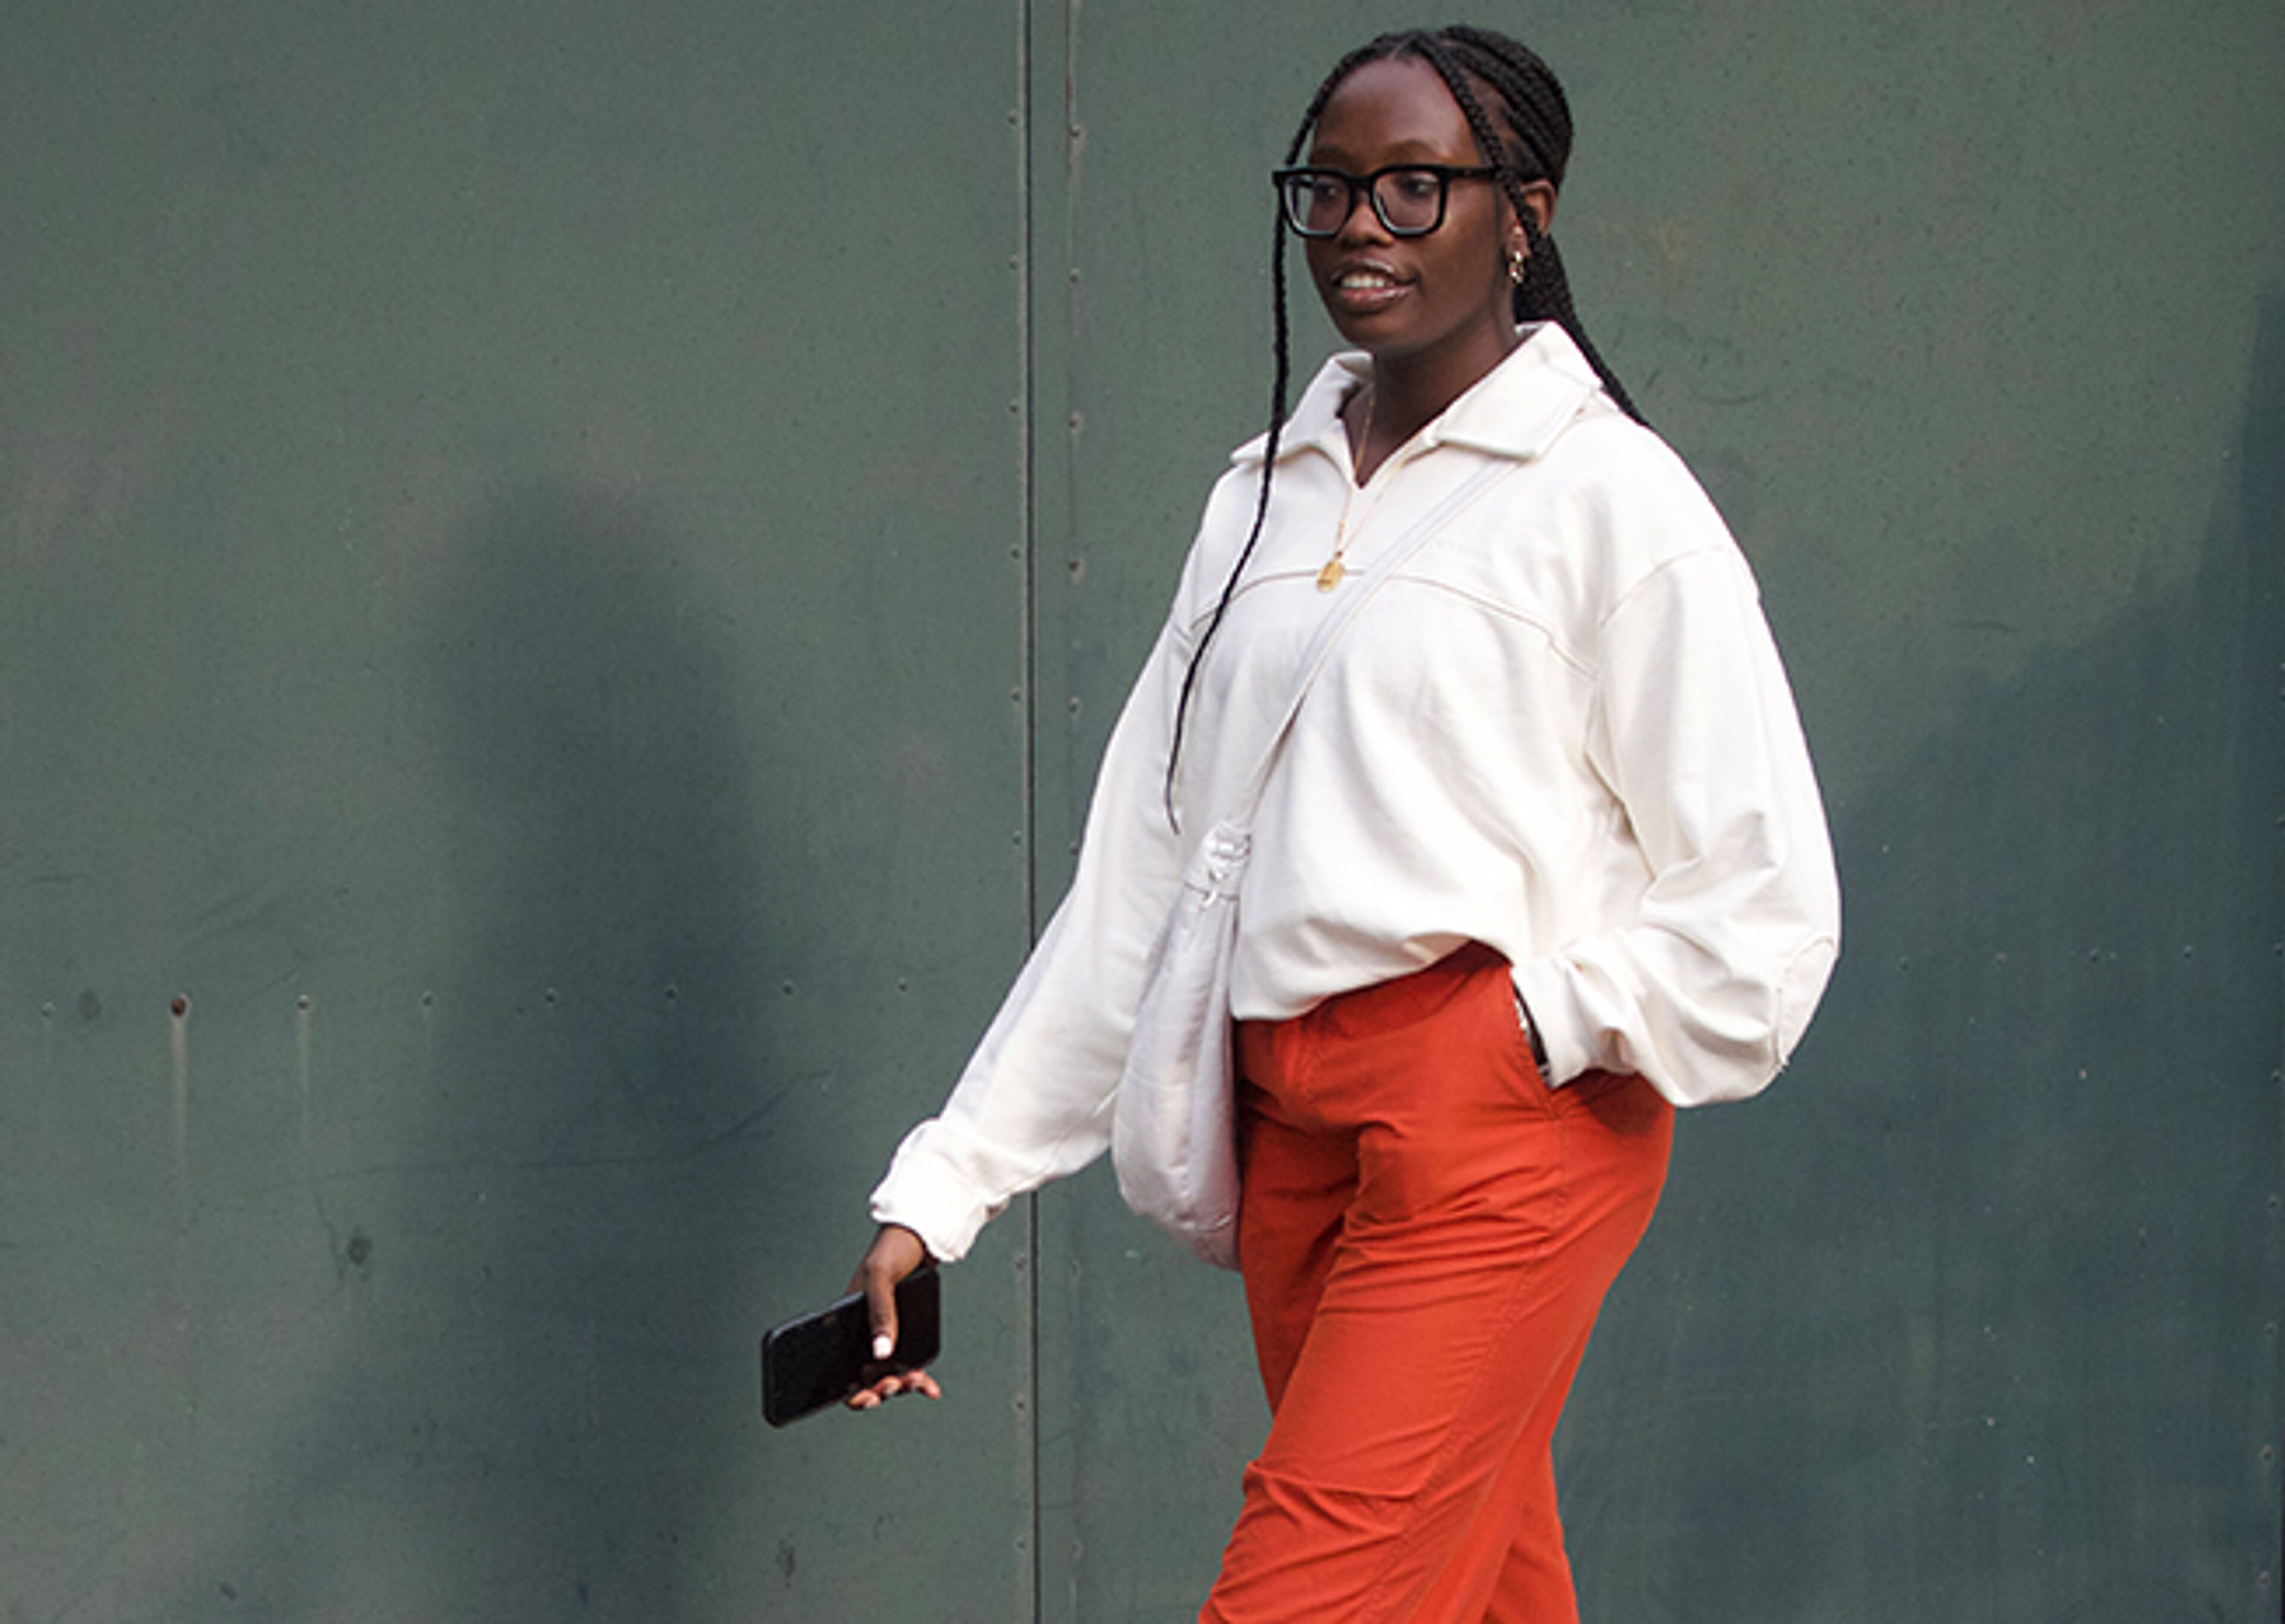 A woman in a white shirt and burnt orange trousers walks confidently, phone in hand, against a green backdrop.